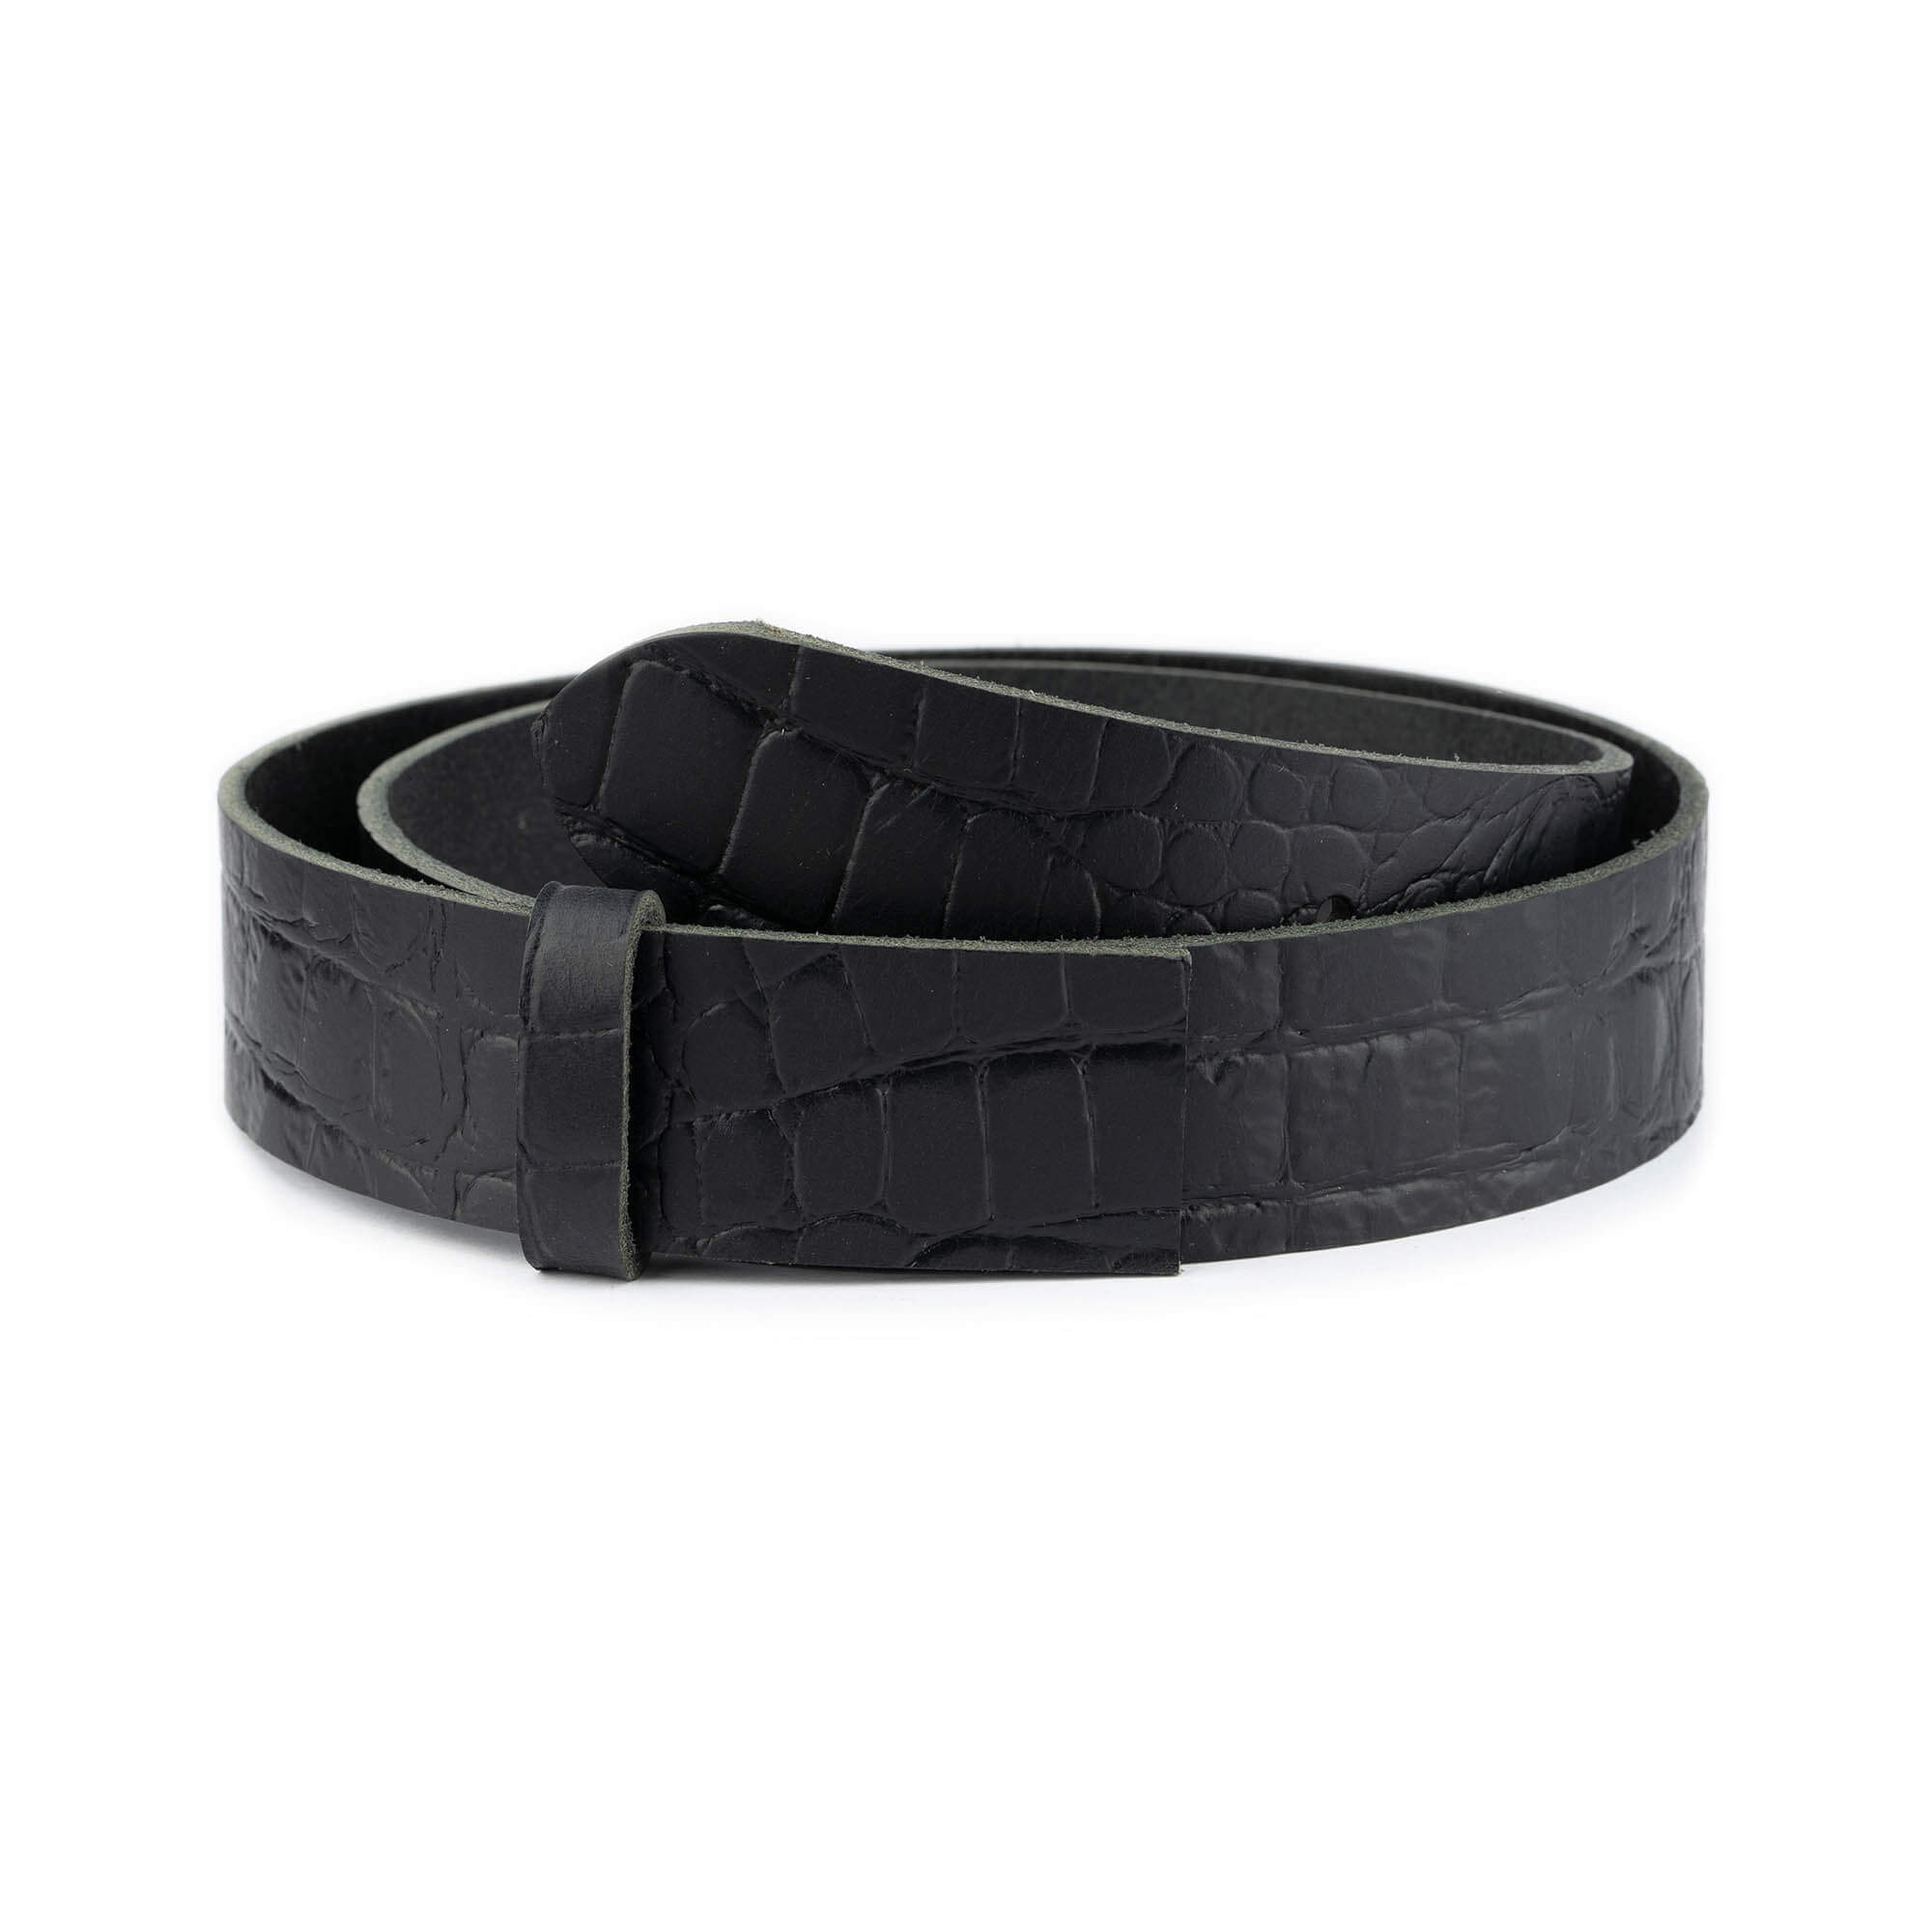 Buy Black Croco Embossed Replacement Belt Strap For Buckles